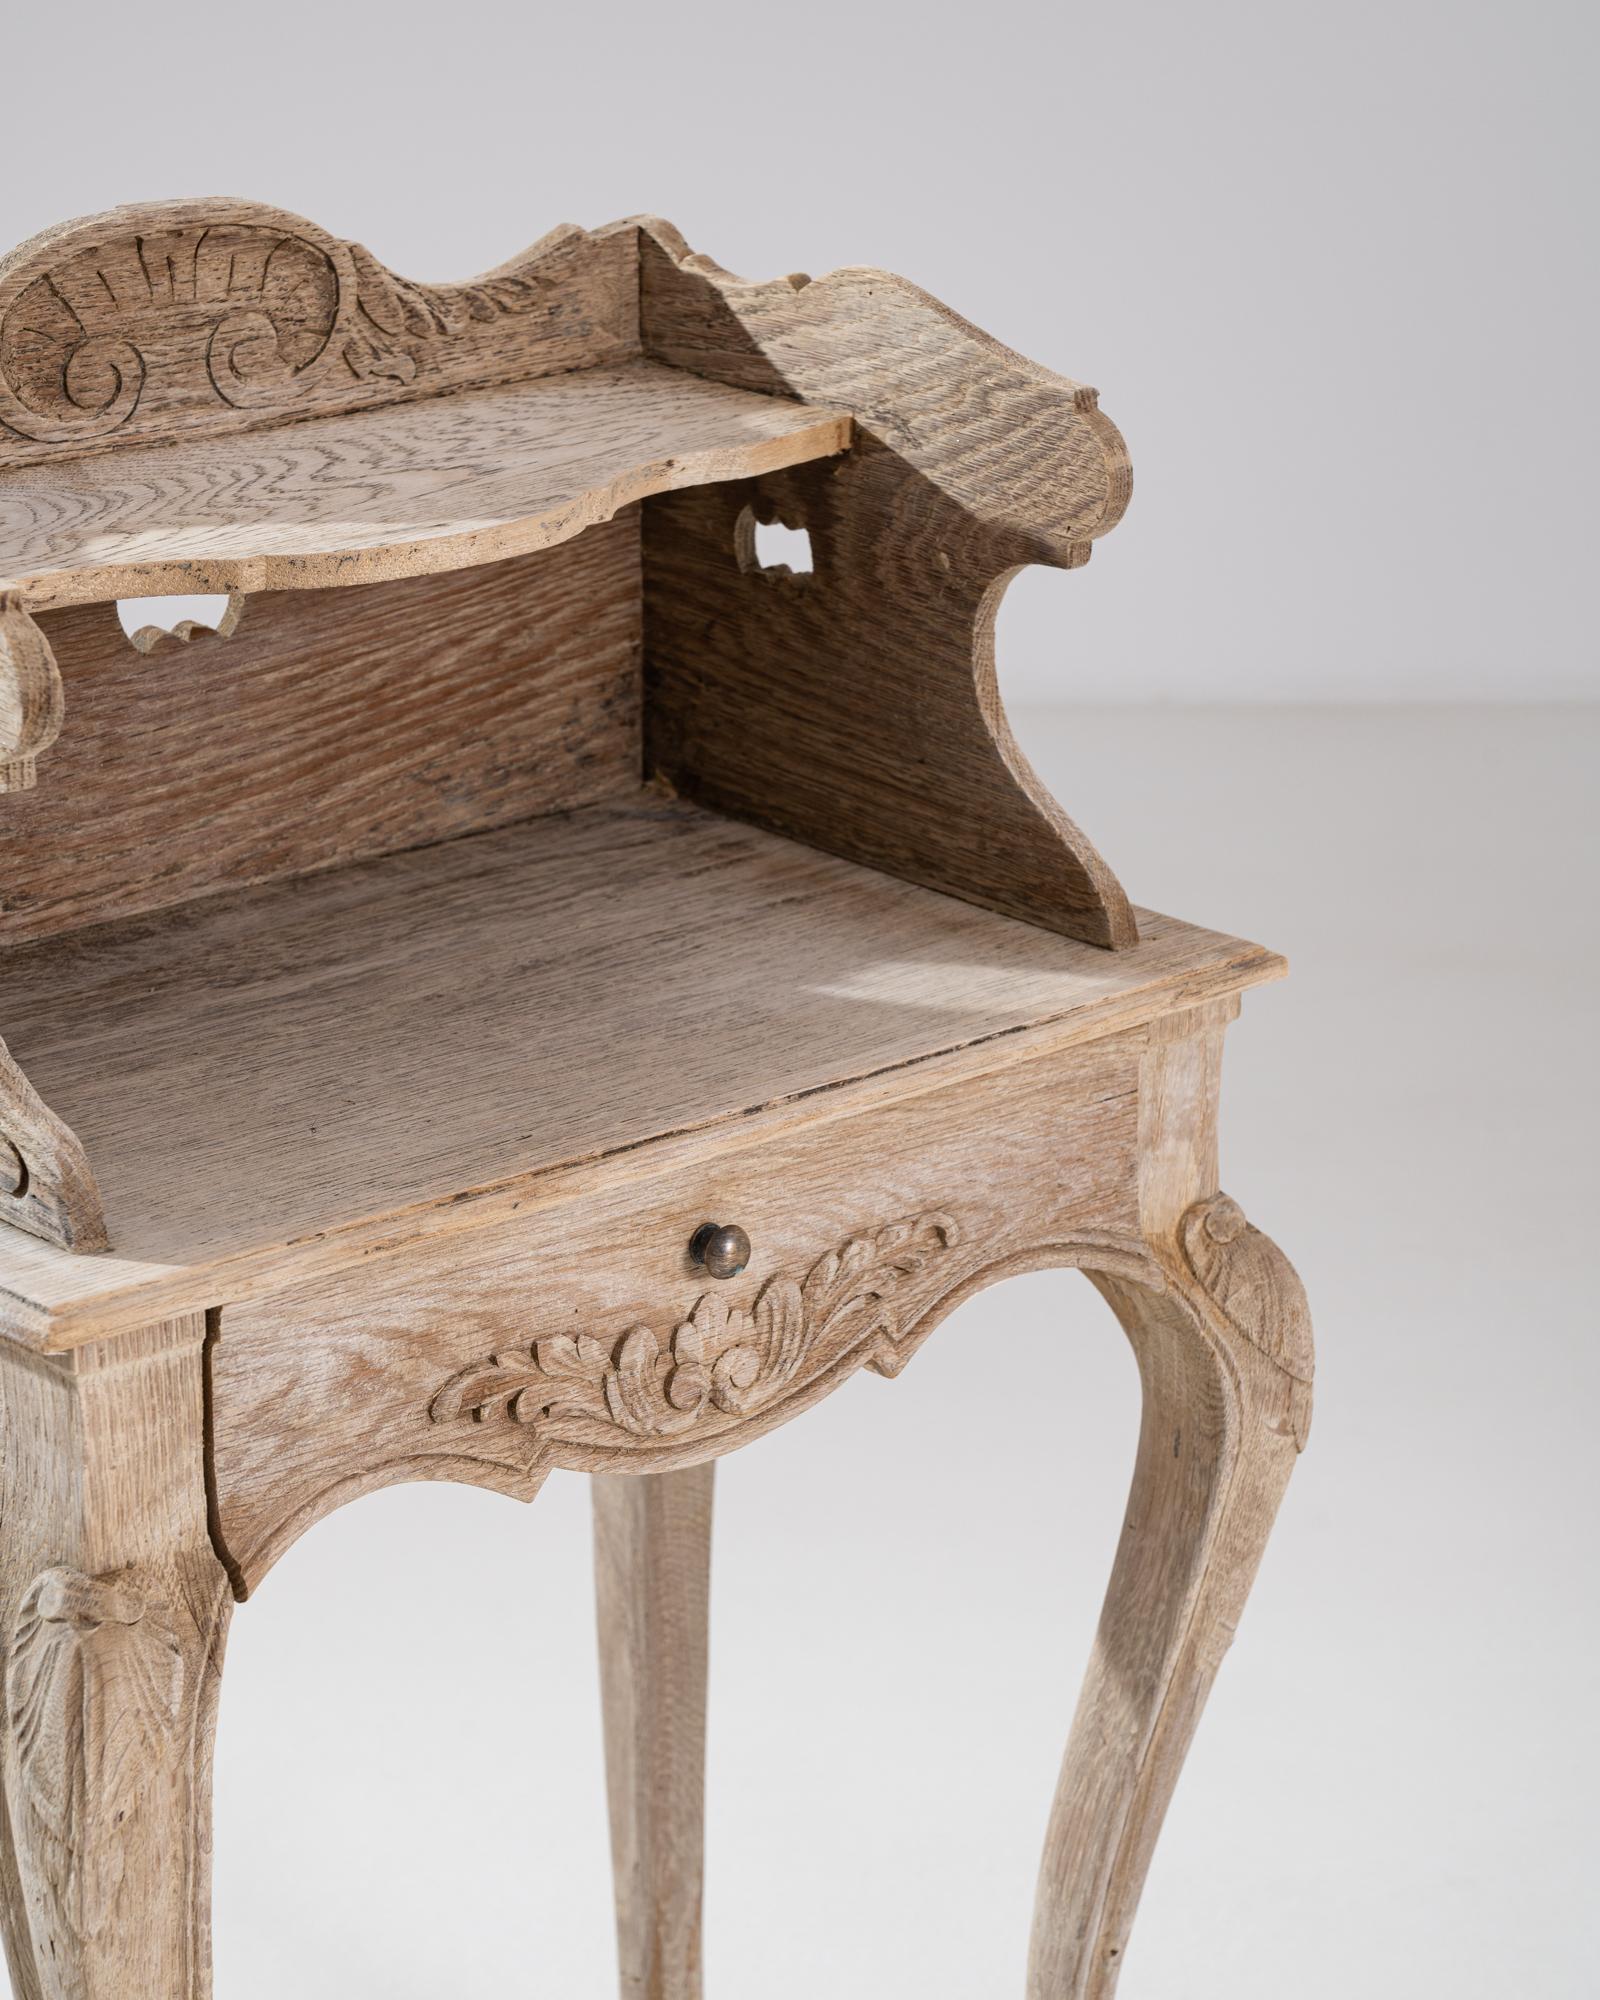 A wooden side table made in early 19th century France. This small table features a drawer and shelf with carved surround. Intricate scroll and leaf patterning eases the eye on each side of this unique table, and artfully sloping legs buttress it.